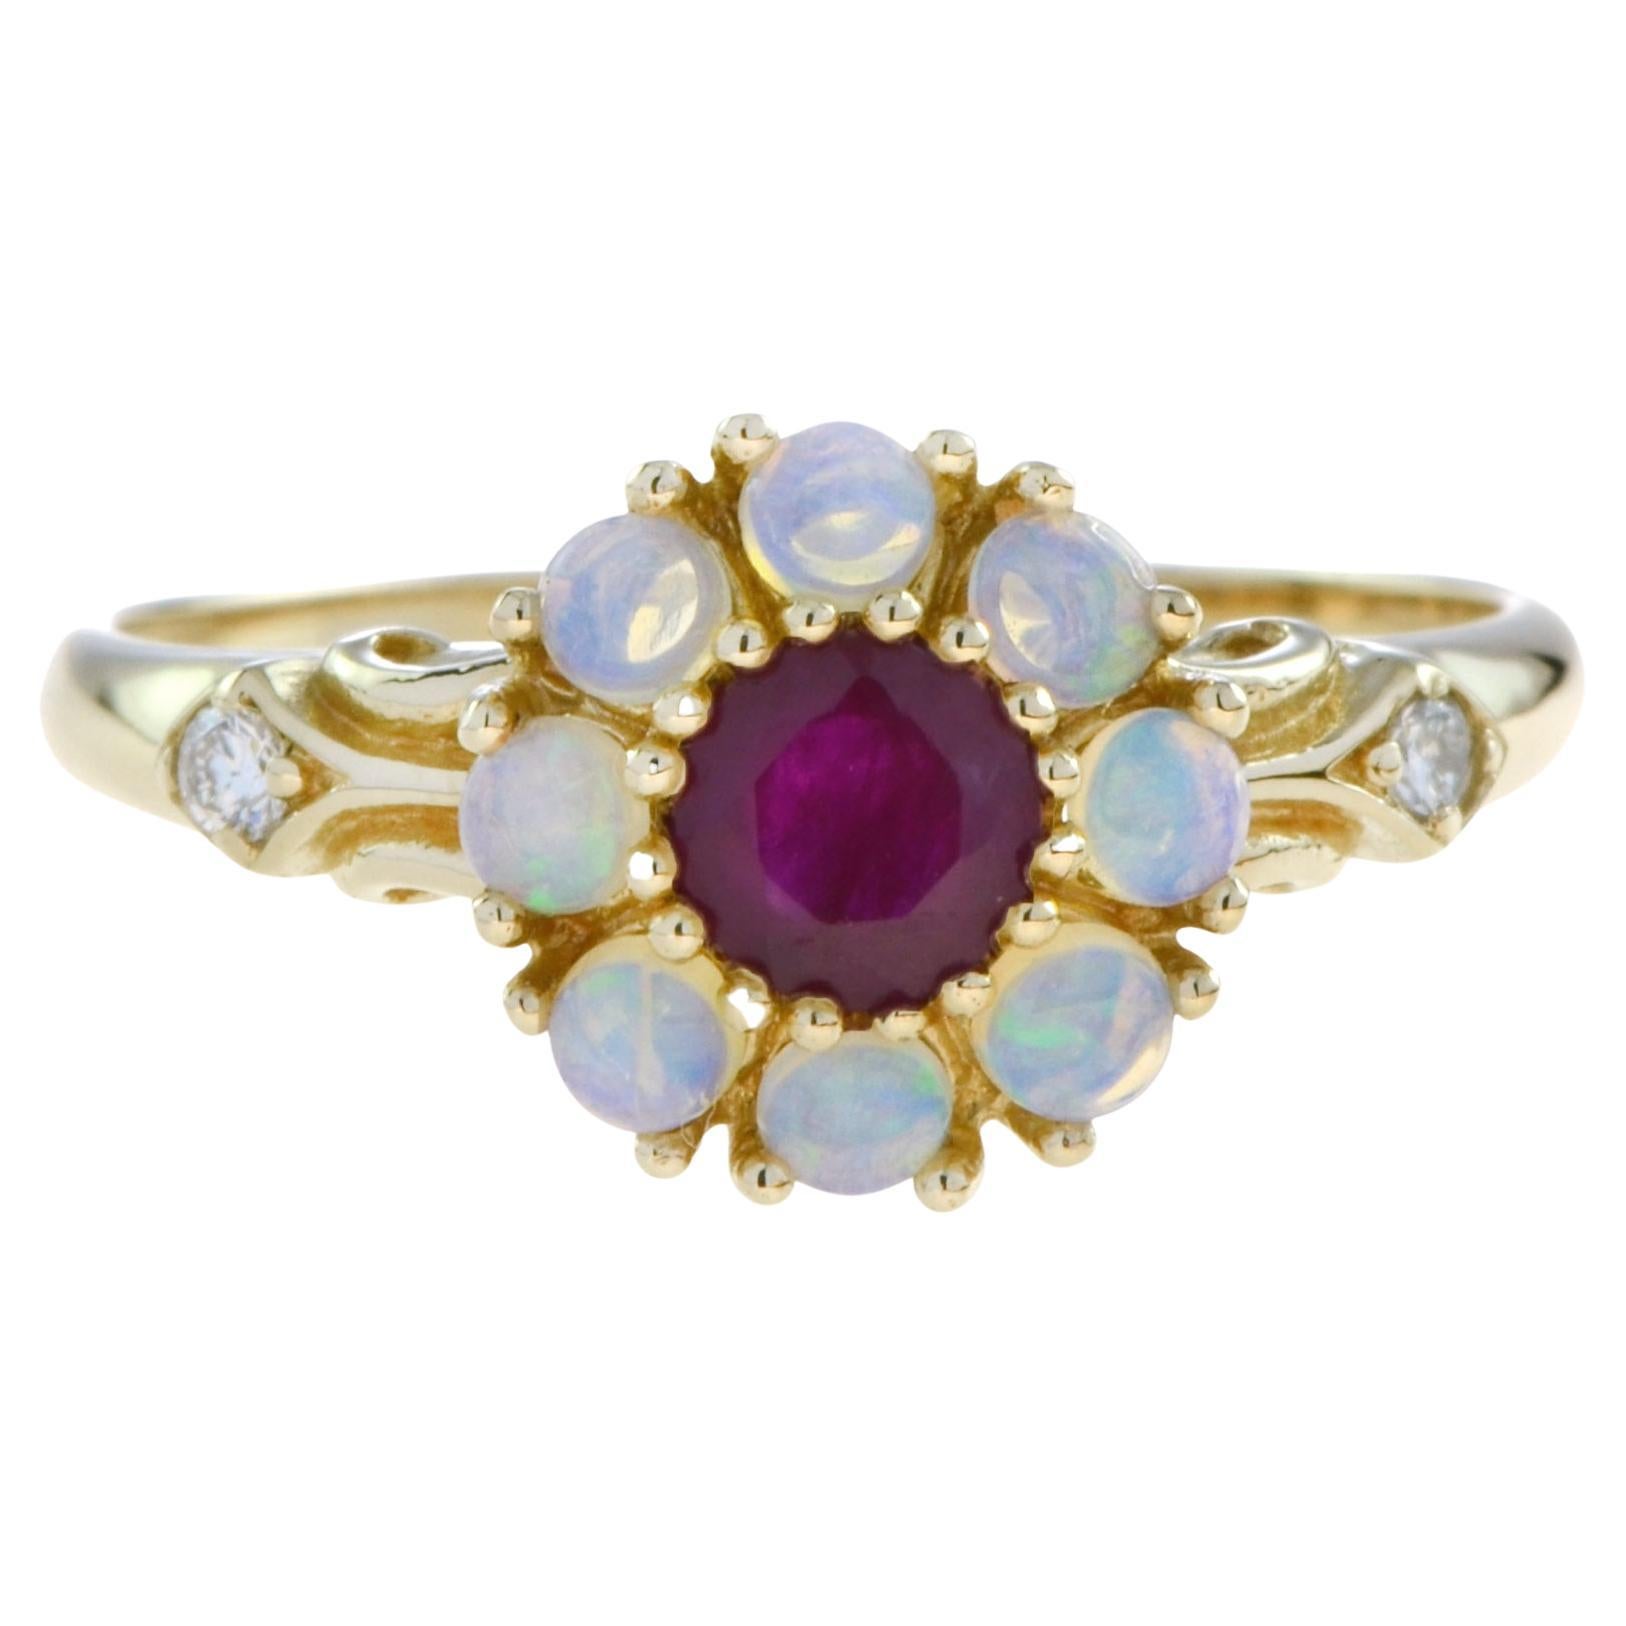 For Sale:  Vintage Style Ruby and Opal Floral Cluster Ring in 14K Yellow Gold